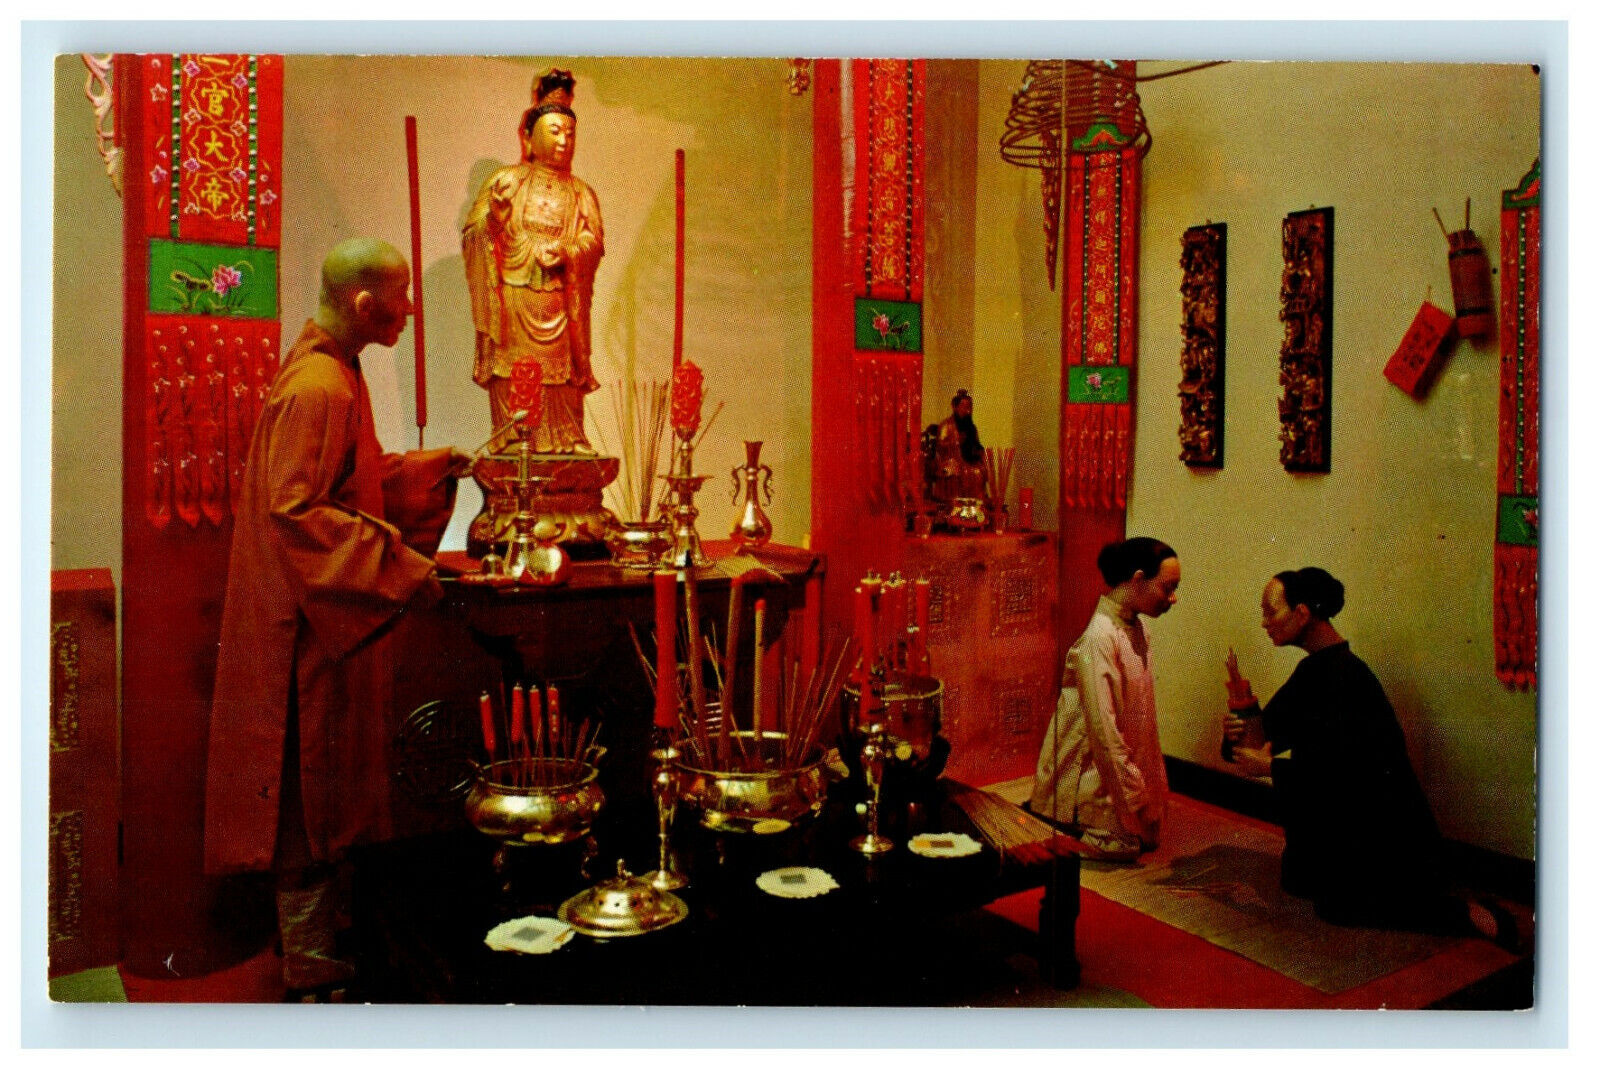 c1960s Monk, Temple God Chinese Temple Wax Museum California CA Postcard